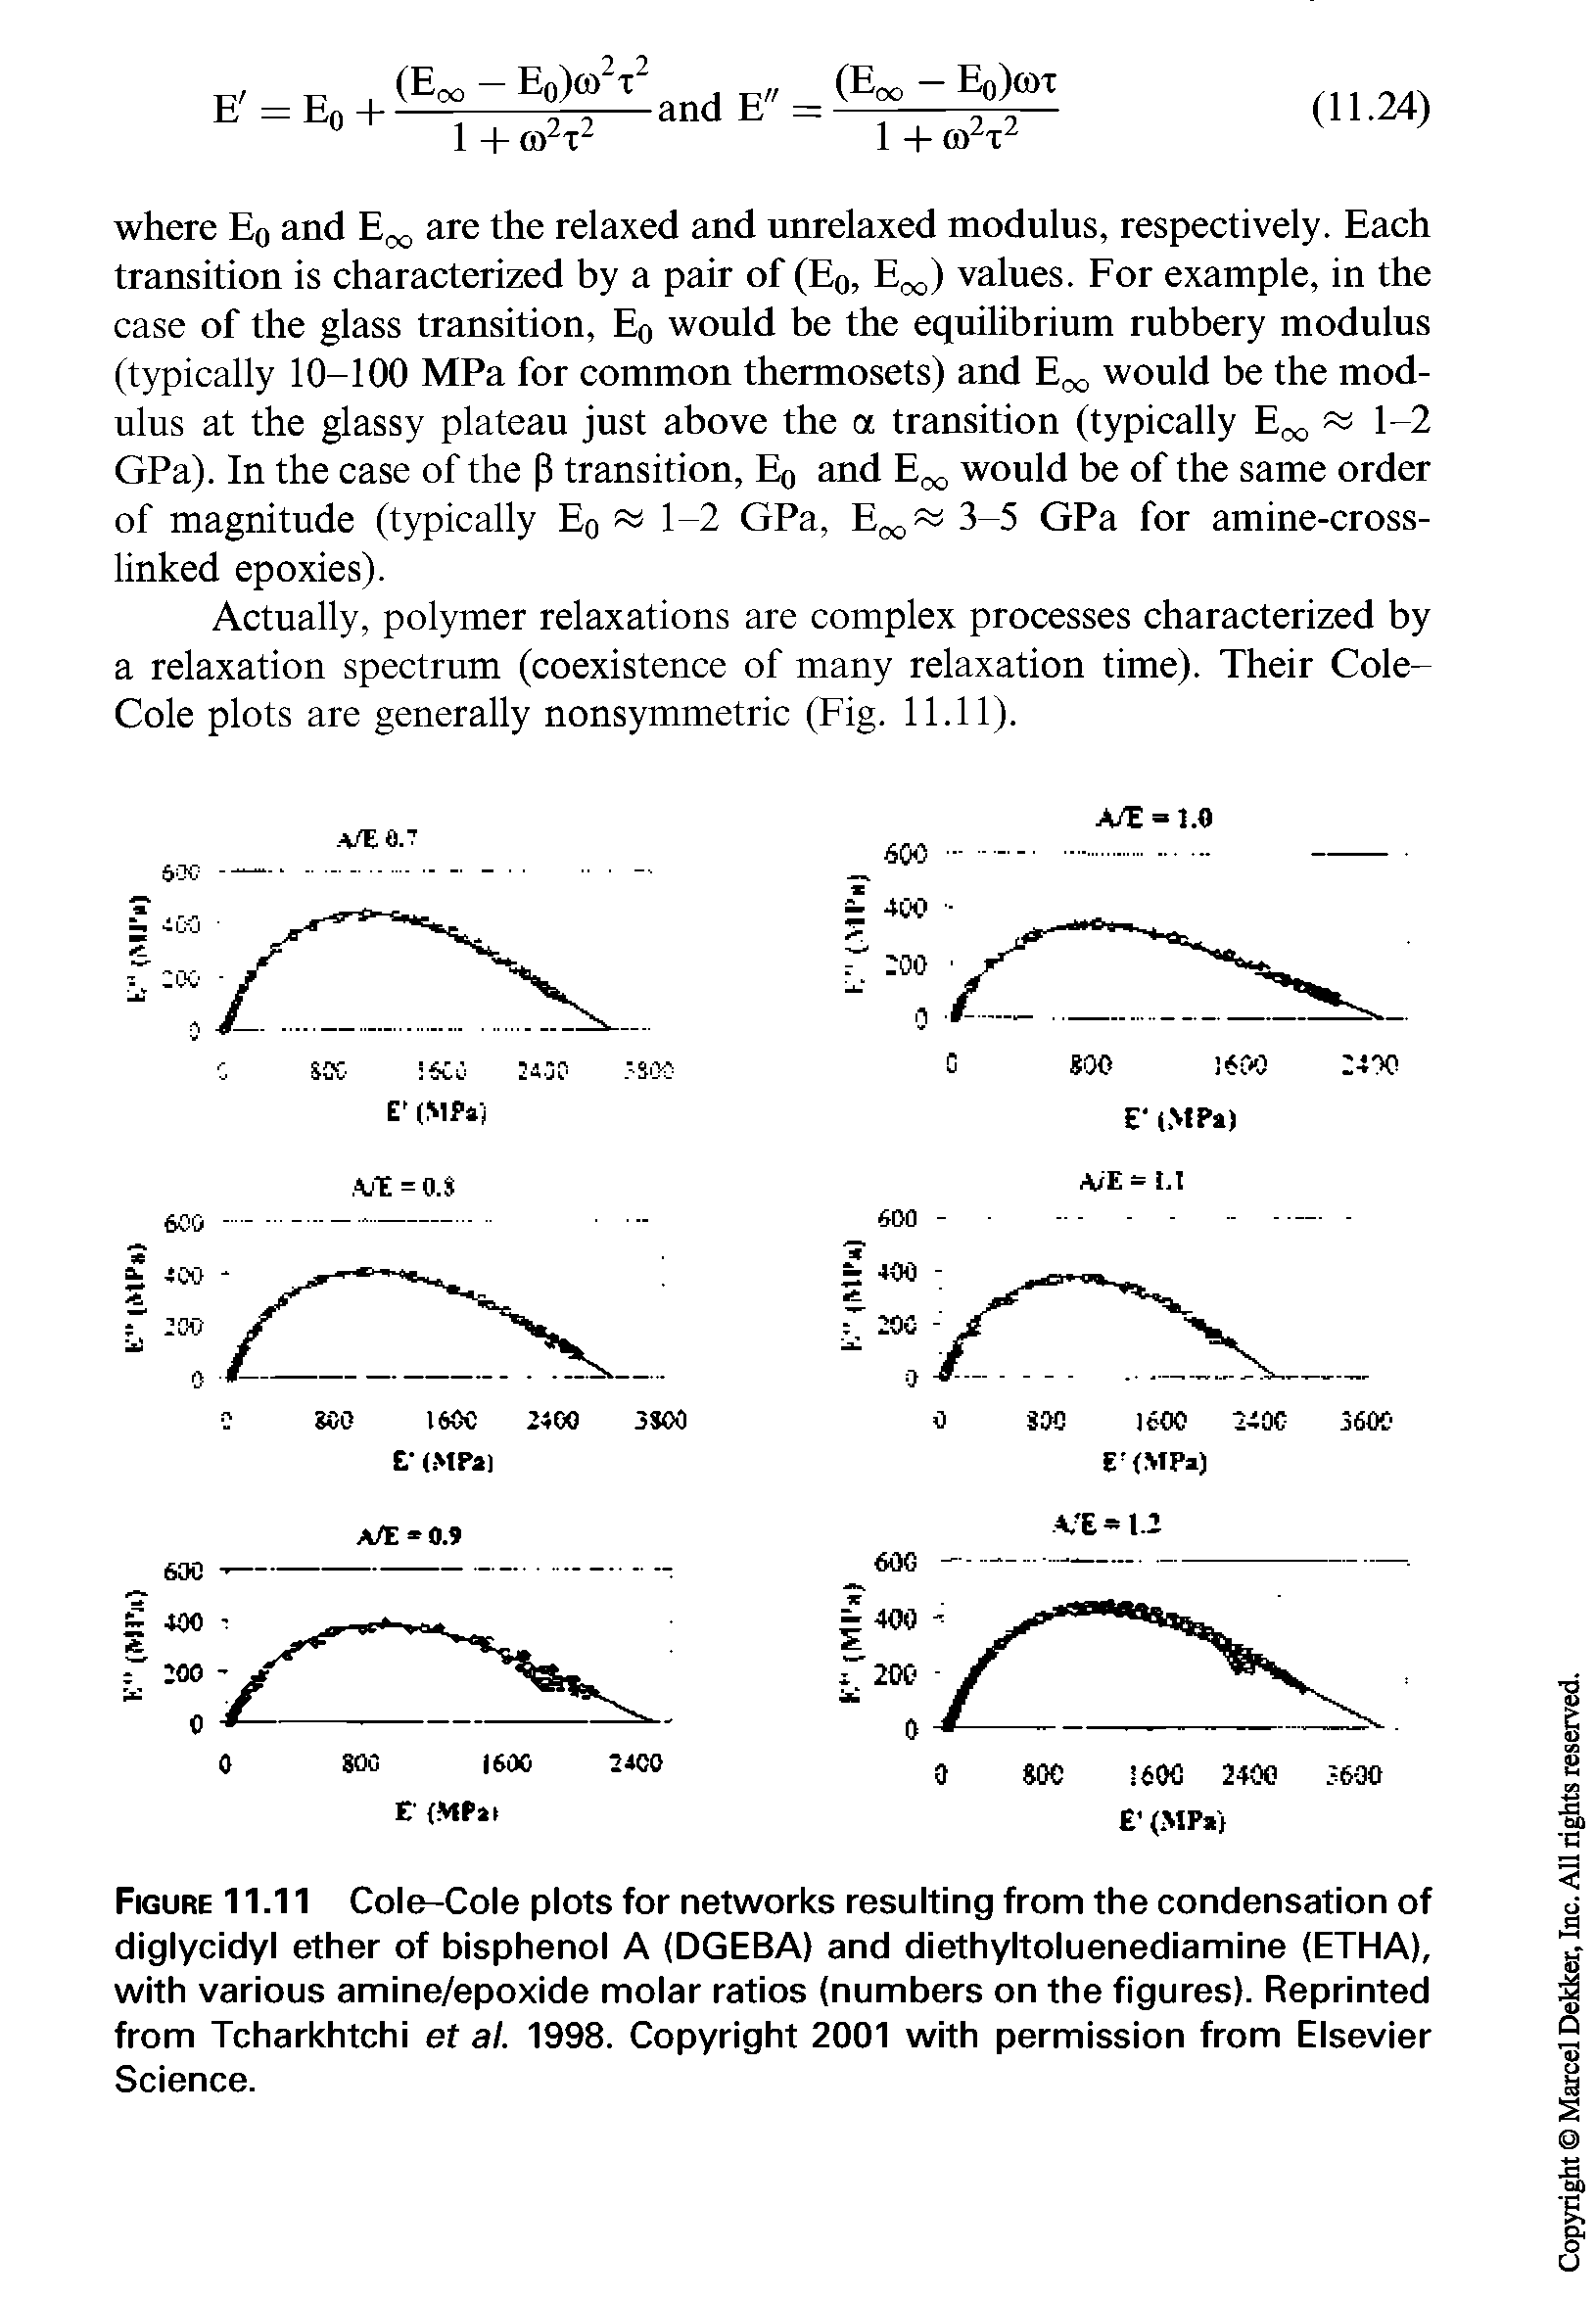 Figure 11.11 Cole-Cole plots for networks resulting from the condensation of diglycidyl ether of bisphenol A (DGEBA) and diethyltoluenediamine (ETHA), with various amine/epoxide molar ratios (numbers on the figures). Reprinted from Tcharkhtchi et at. 1998. Copyright 2001 with permission from Elsevier Science.